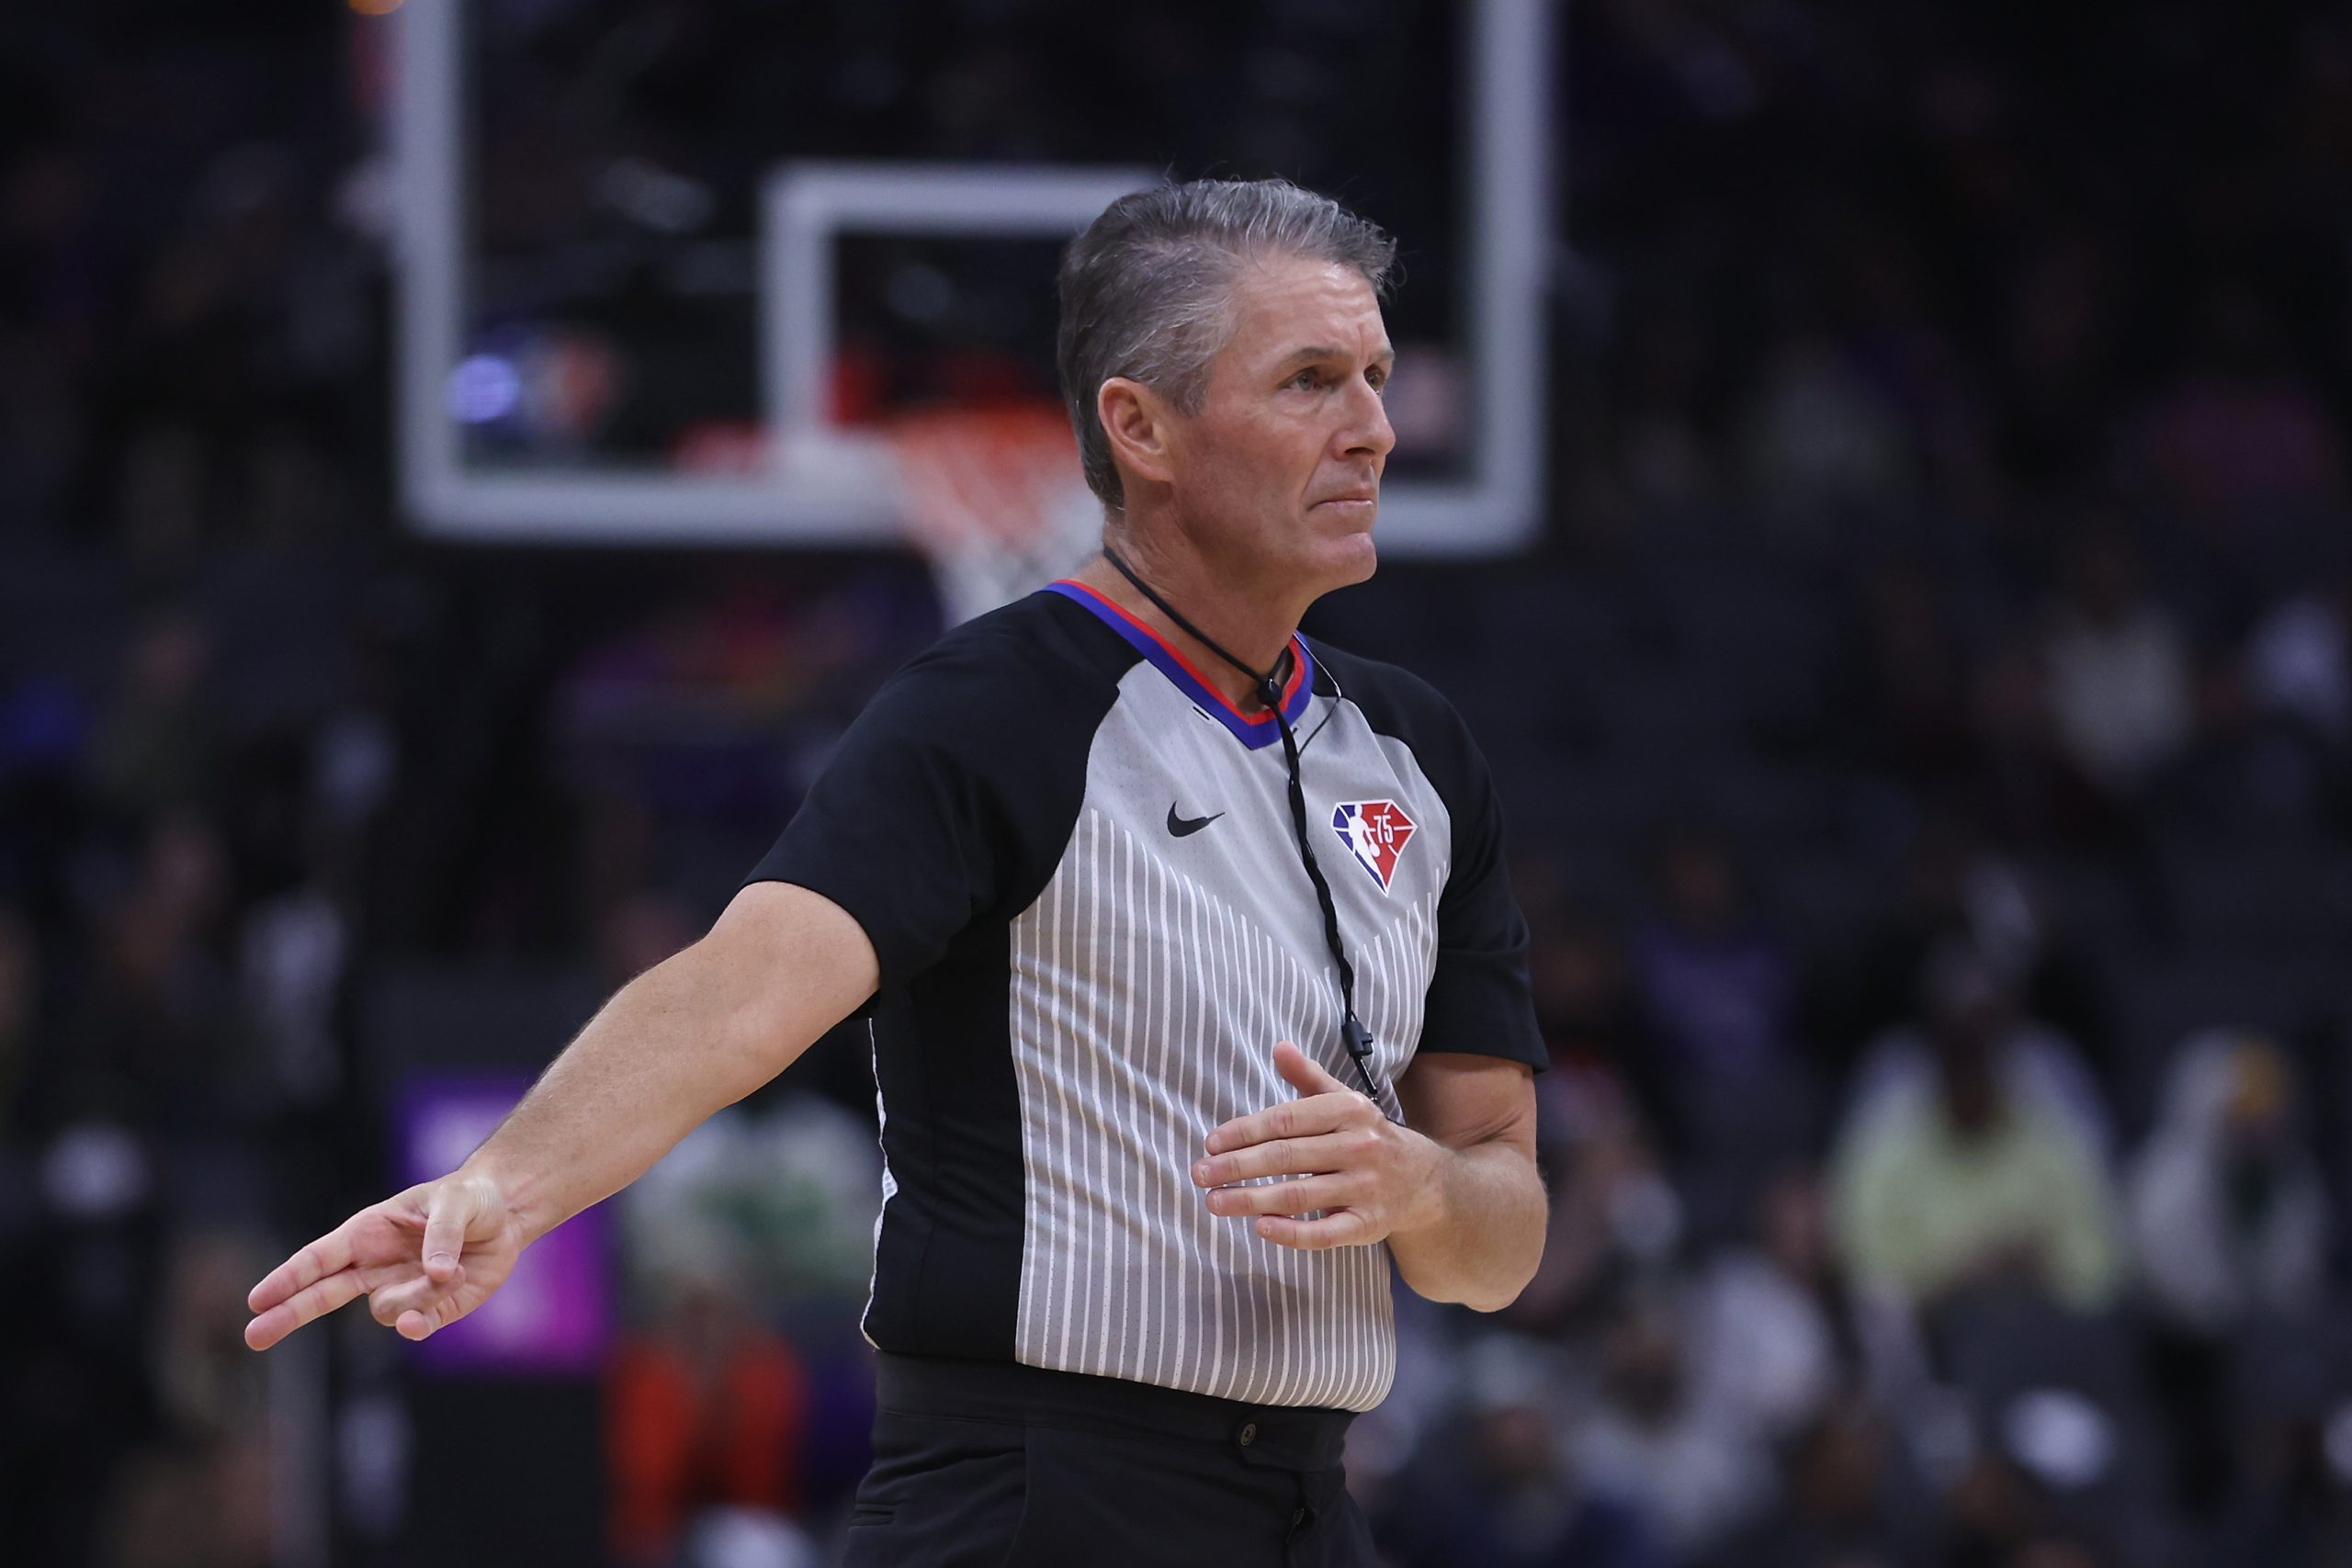 Referee Scott Foster officiates the game between the Sacramento Kings and the Denver Nuggets.